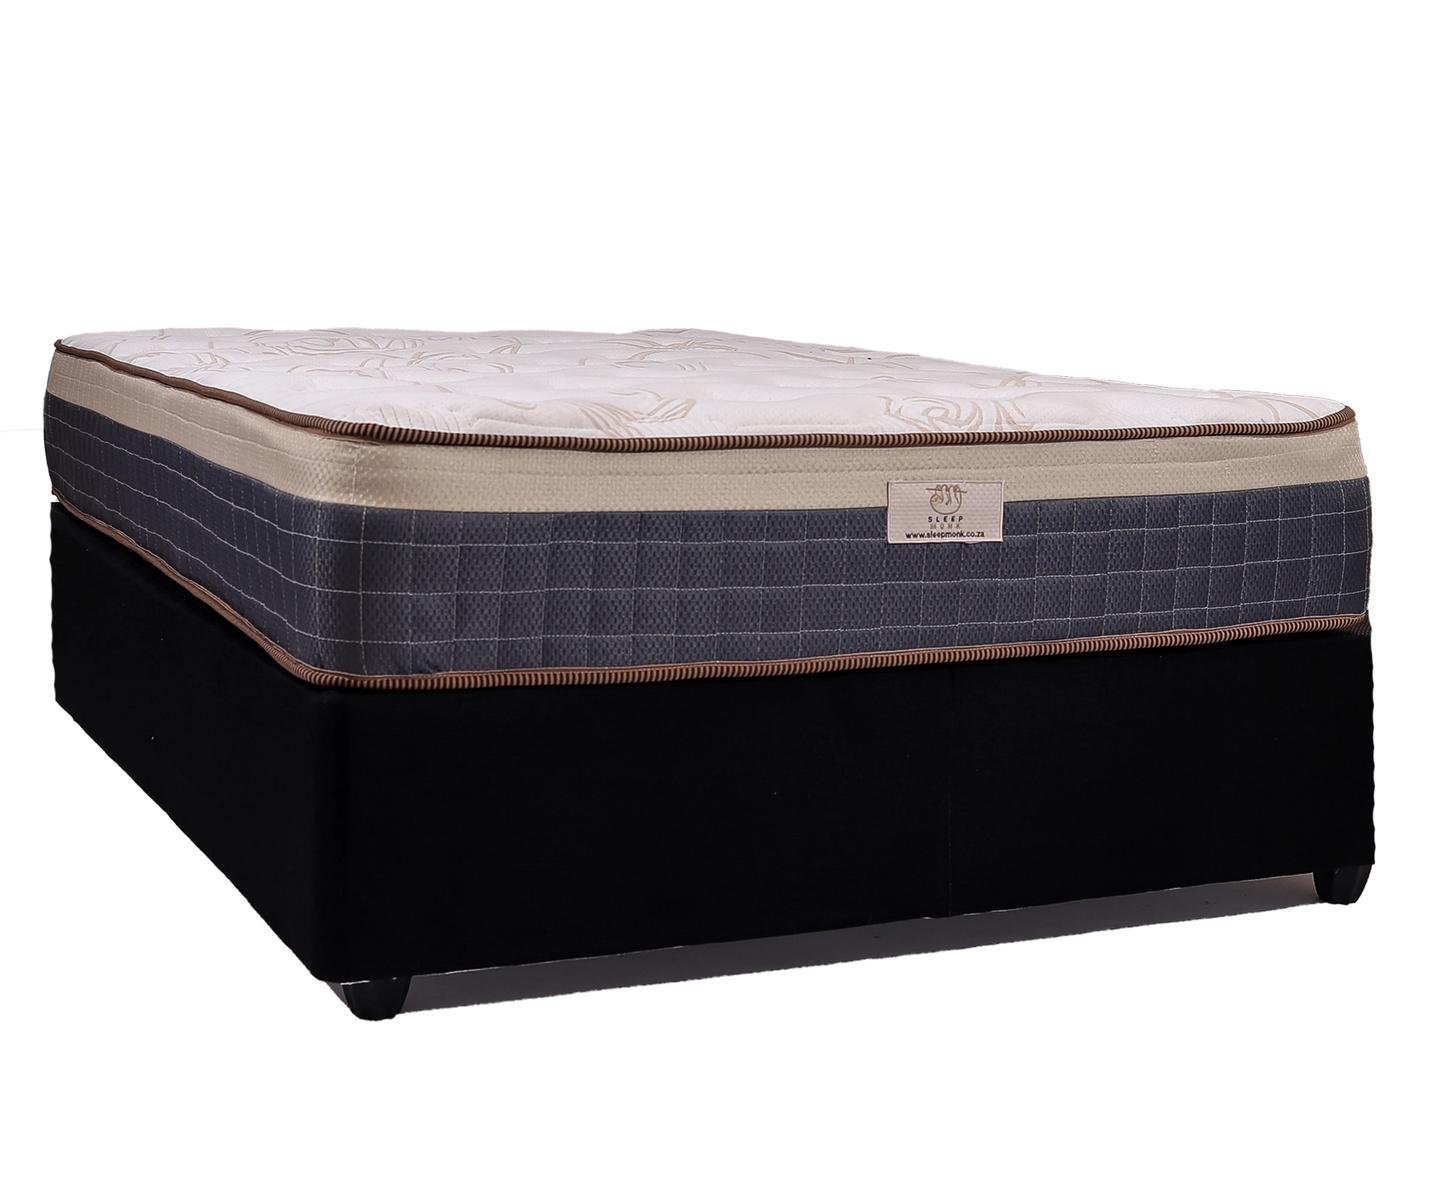 EuroTop Deluxe King Mattress and Base set